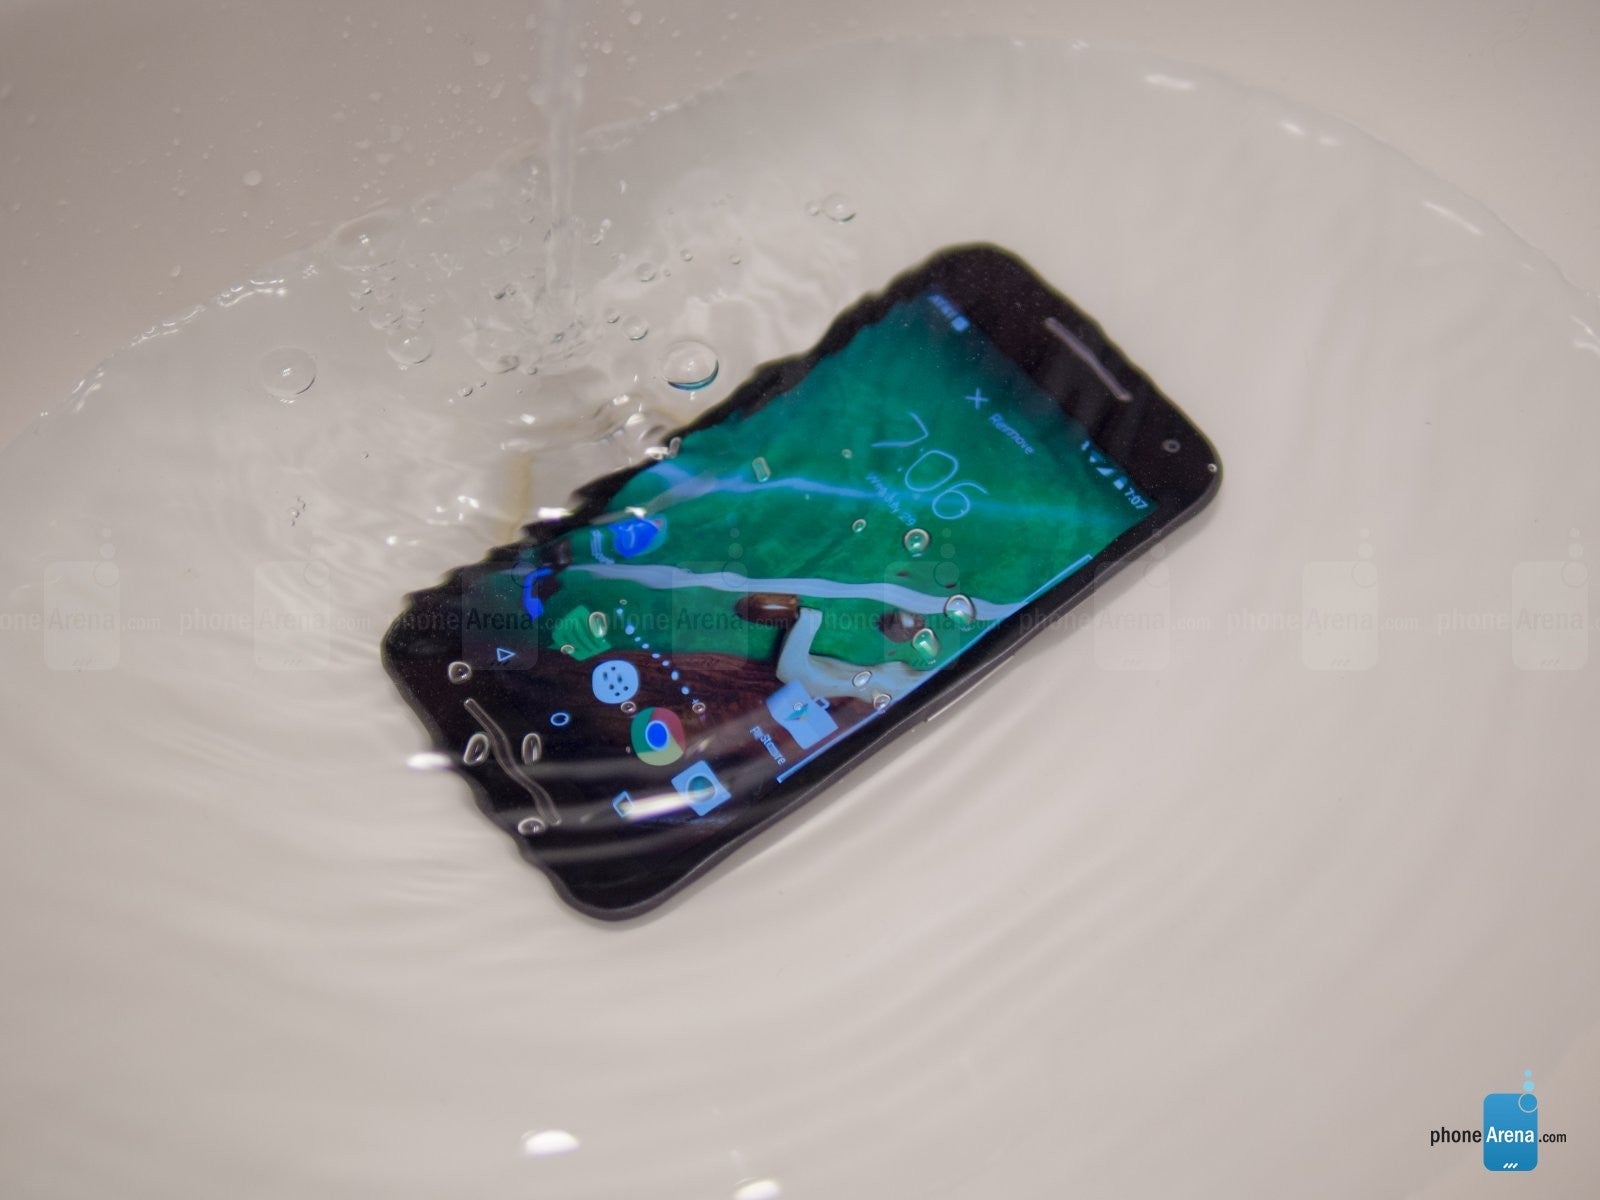 Moto G 2015 safely taking a bath - Moto G evolution: excellent averageness through the years